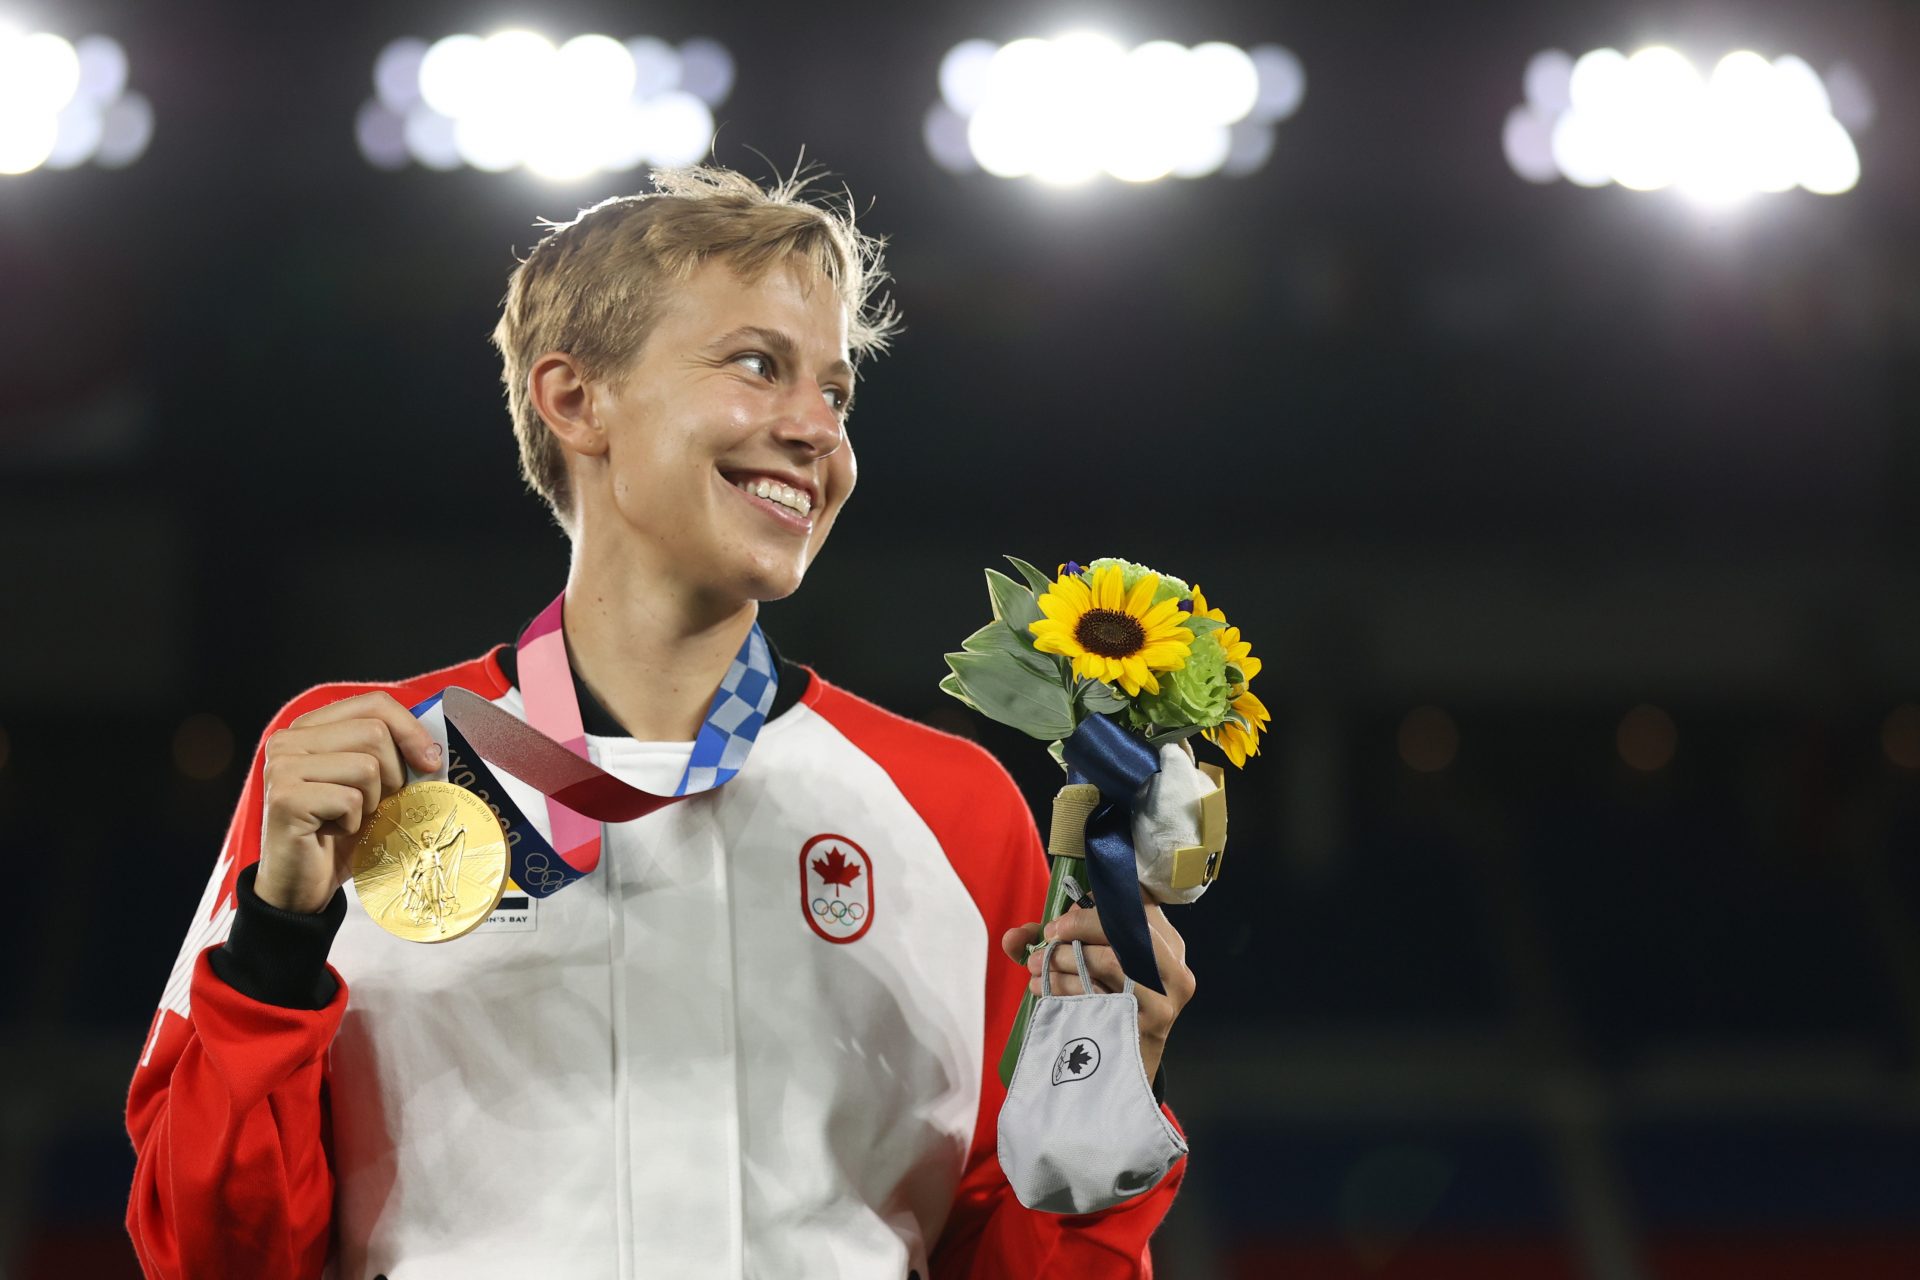 Quinn Makes History as the First-Ever Openly Transgender Athlete to Take an Olympic Medal